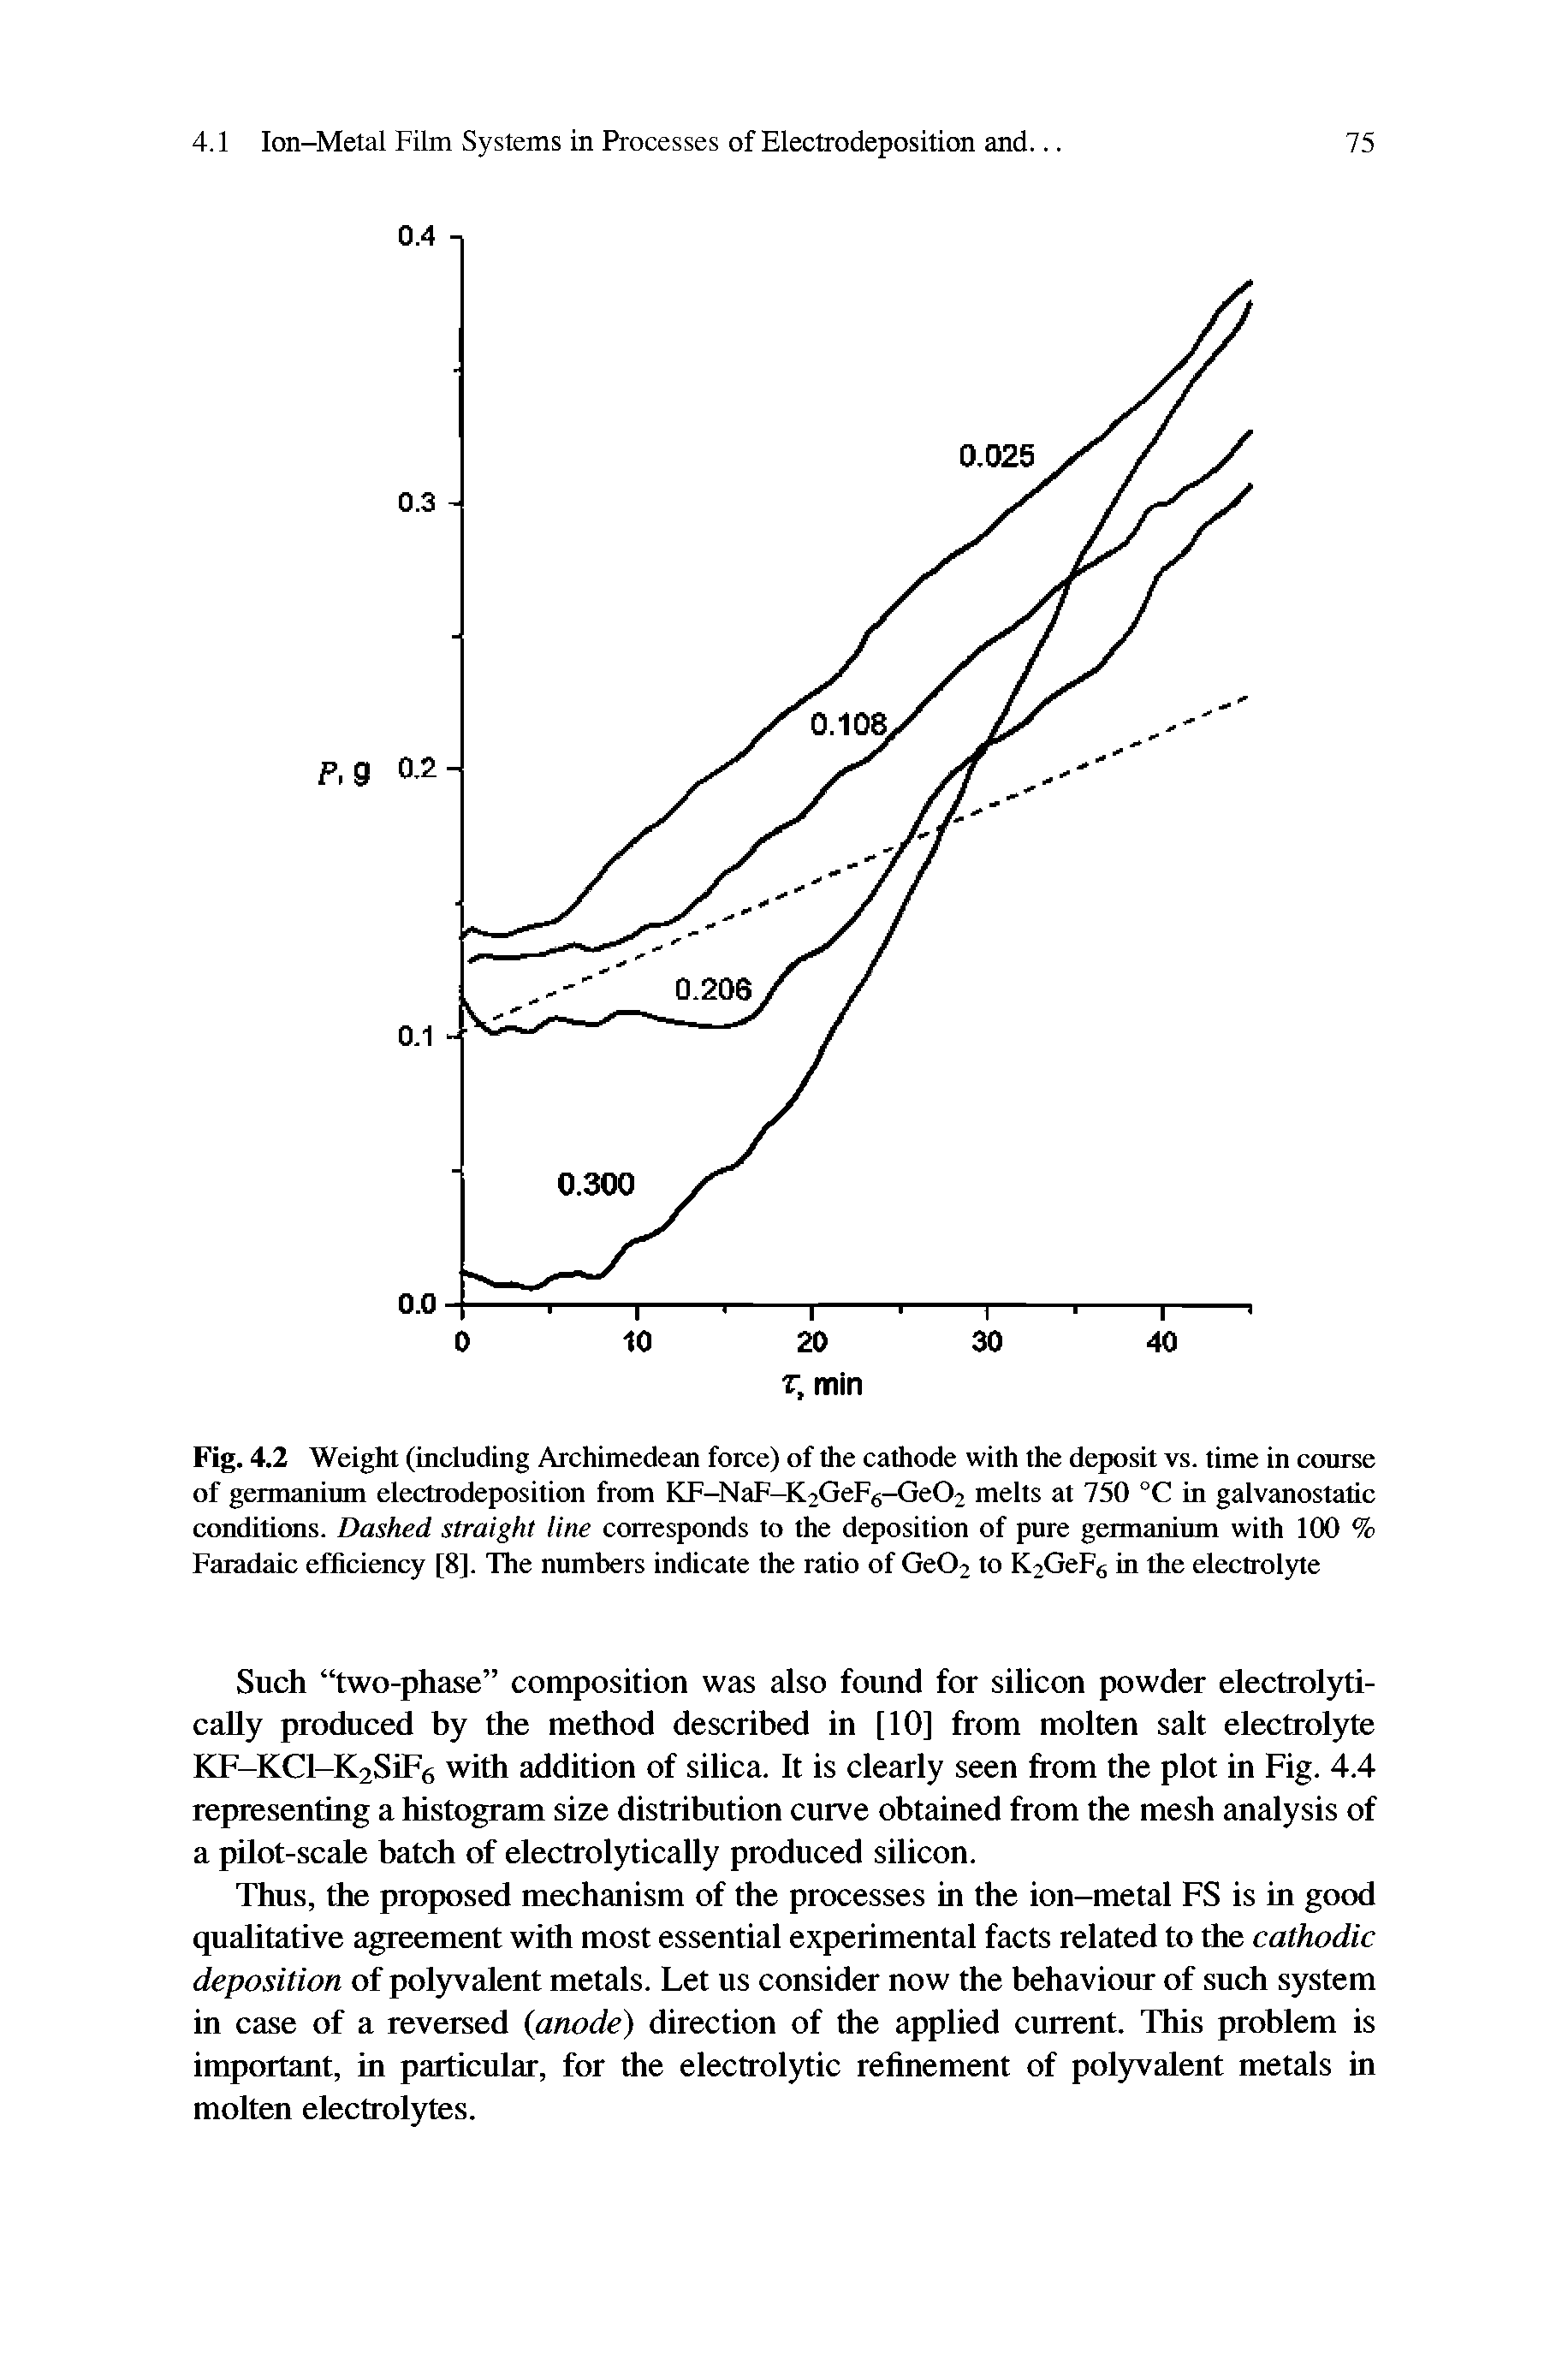 Fig. 4.2 Weight (including Archimedean force) of the cathode with the deposit vs. time in course of germanium electrodeposition from KF-NaF-K2GeFs-Ge02 melts at 750 °C in galvanostatic conditions. Dashed straight line corresponds to the deposition of pure germanium with 100 % Faradaic efficiency [8]. The numbers indicate the ratio of Ge02 to K2GeFs in the electrolyte...